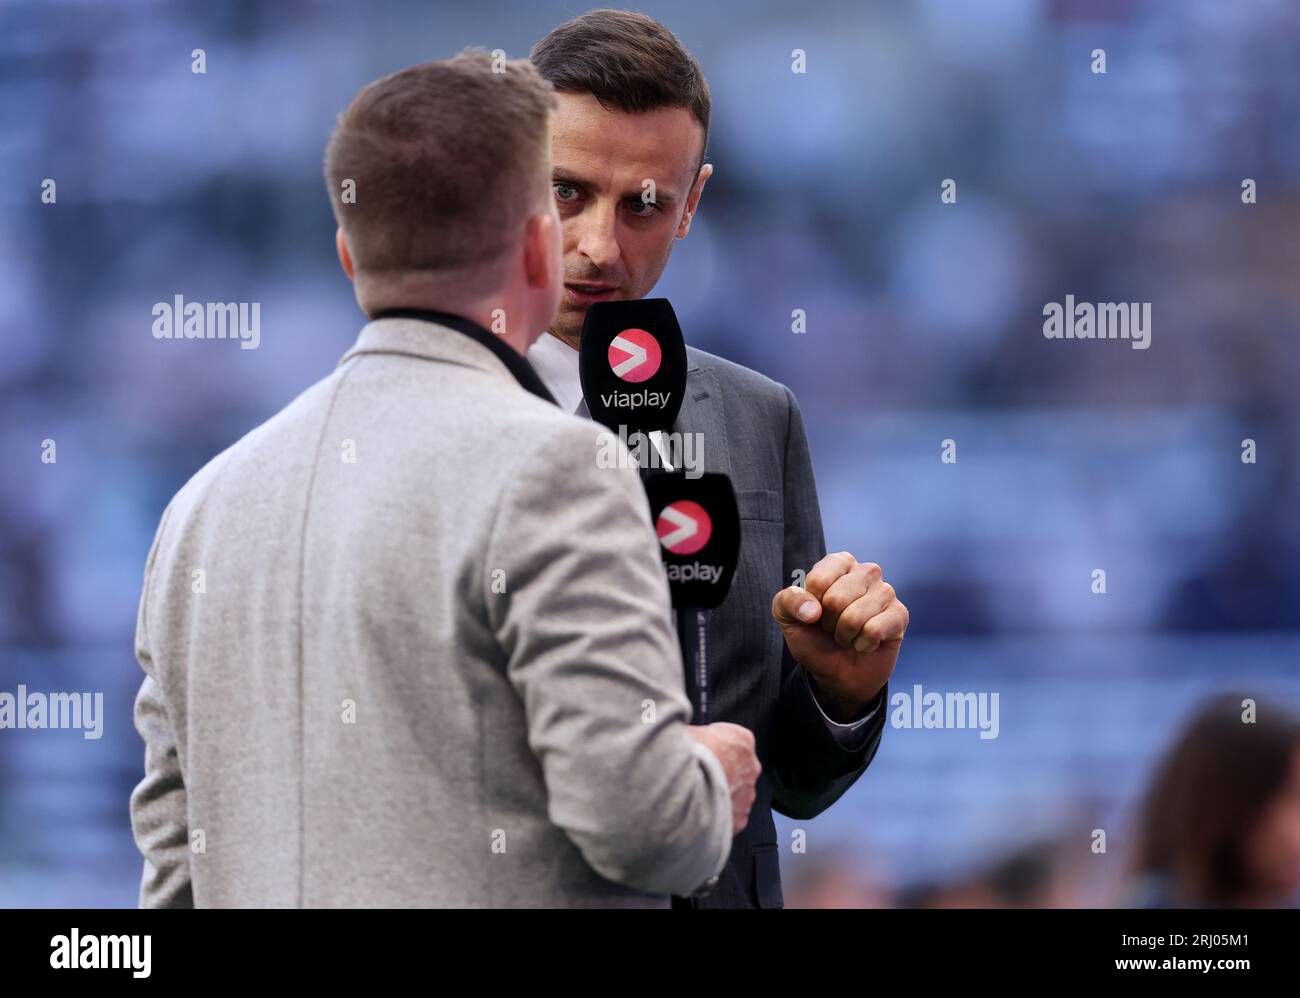 London, UK. 19th Aug, 2023. Ex footballer Dimitar Berbatov presents for tv broadcasting channel during the Premier League match at the Tottenham Hotspur Stadium, London. Picture credit should read: Paul Terry/Sportimage Credit: Sportimage Ltd/Alamy Live News Stock Photo